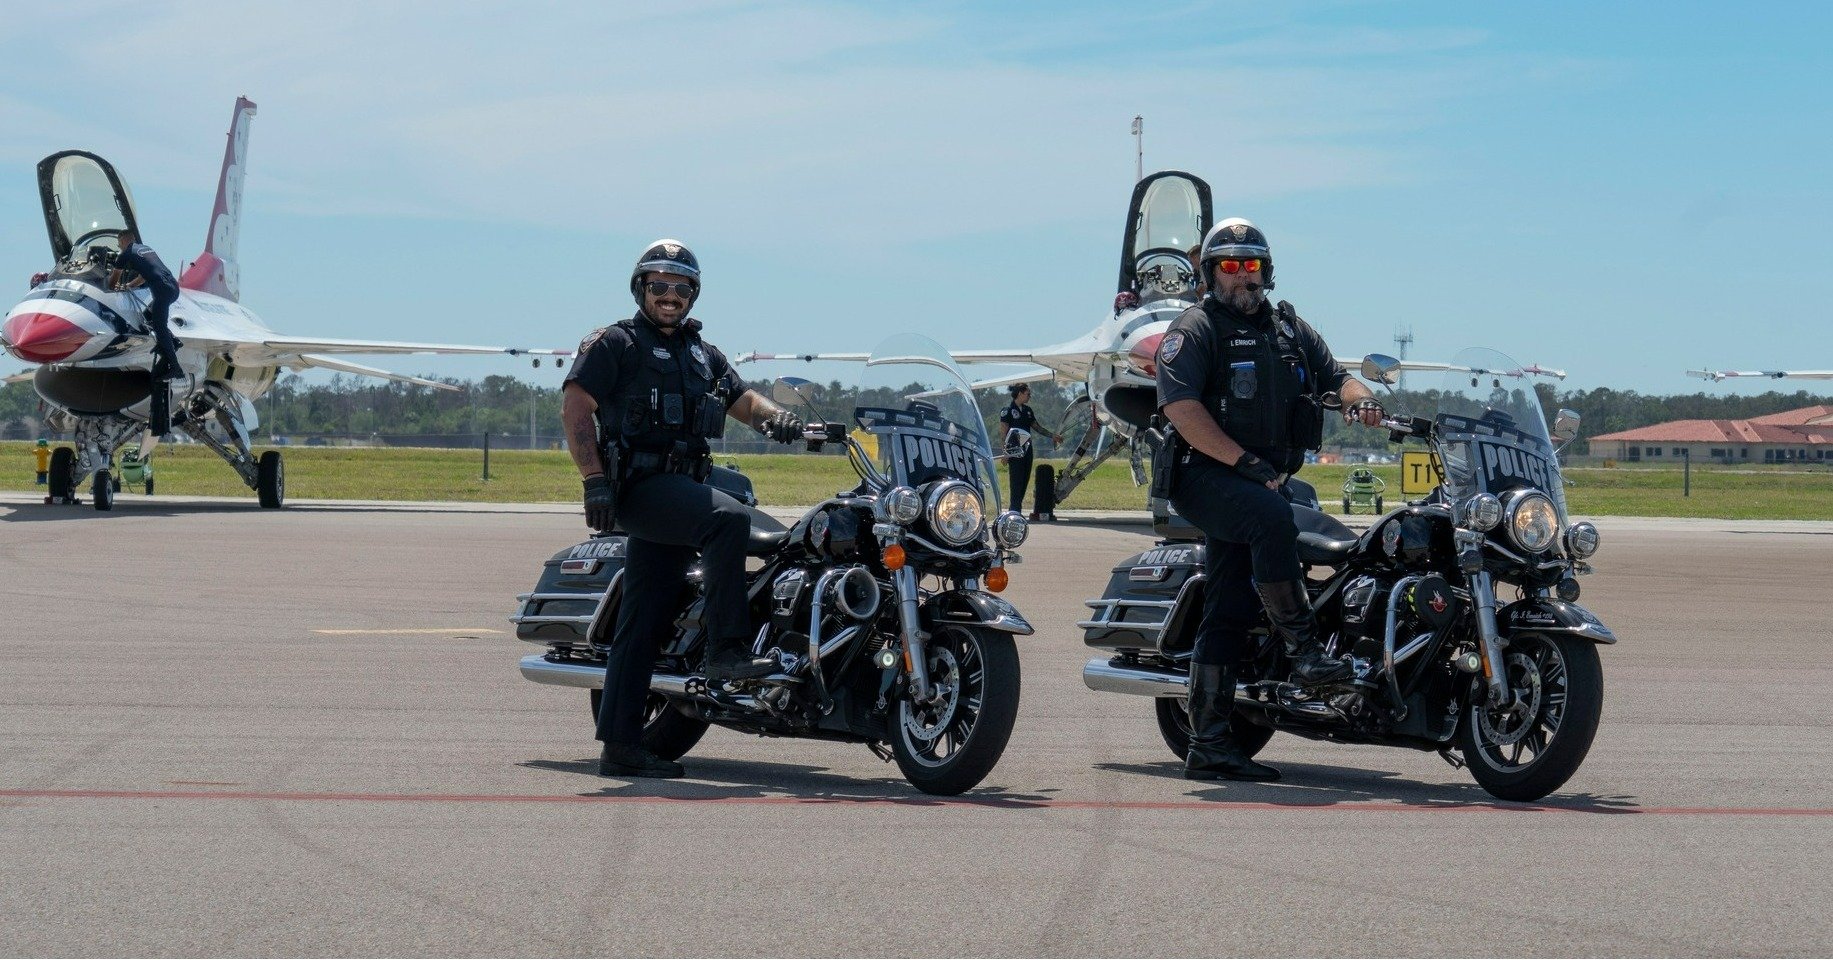 May the (Air) Force be with you! Thank you to our partners at the Tampa Police Department for passing along these outstanding photos of Officer Mendes and Officer Emrich with the Air Force Thunderbirds during AirFest 2024 at MacDill Air Force Base. 7